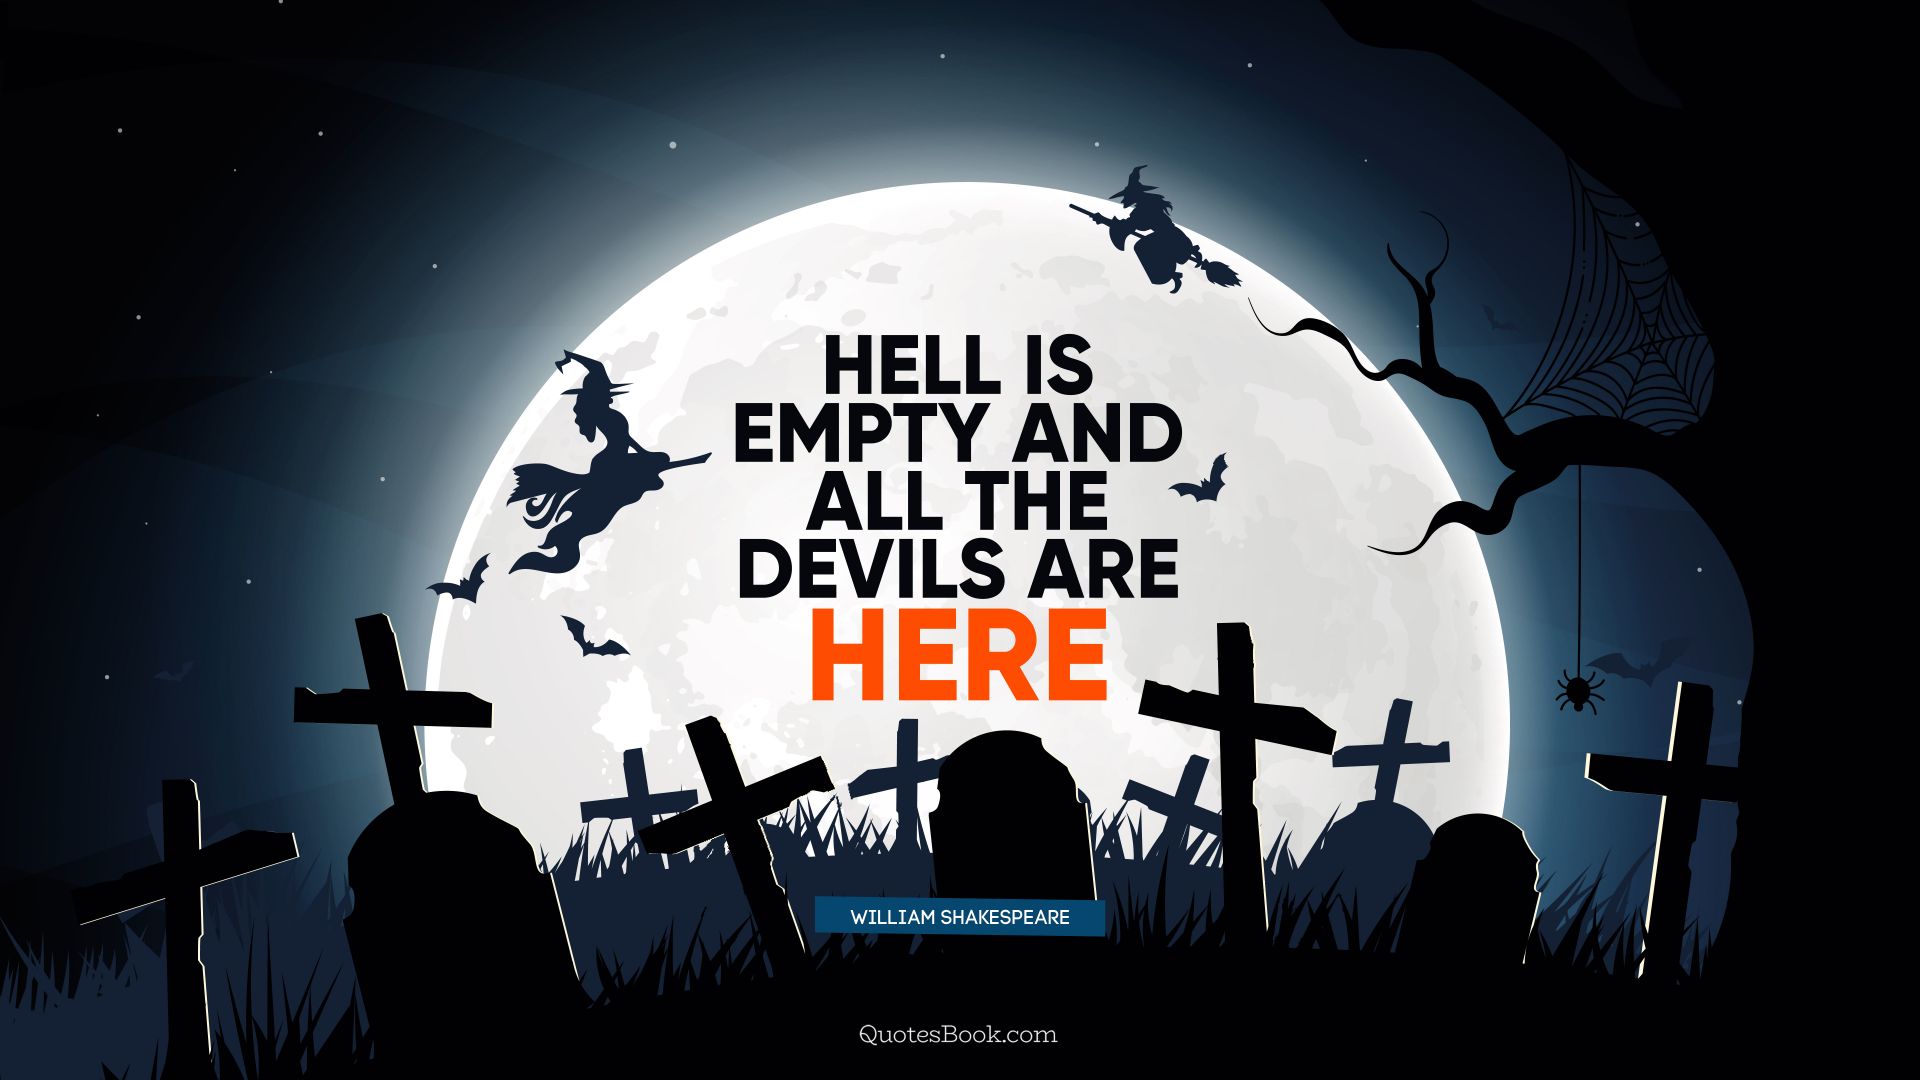 Hell is empty and all the devils are here. - Quote by William Shakespeare